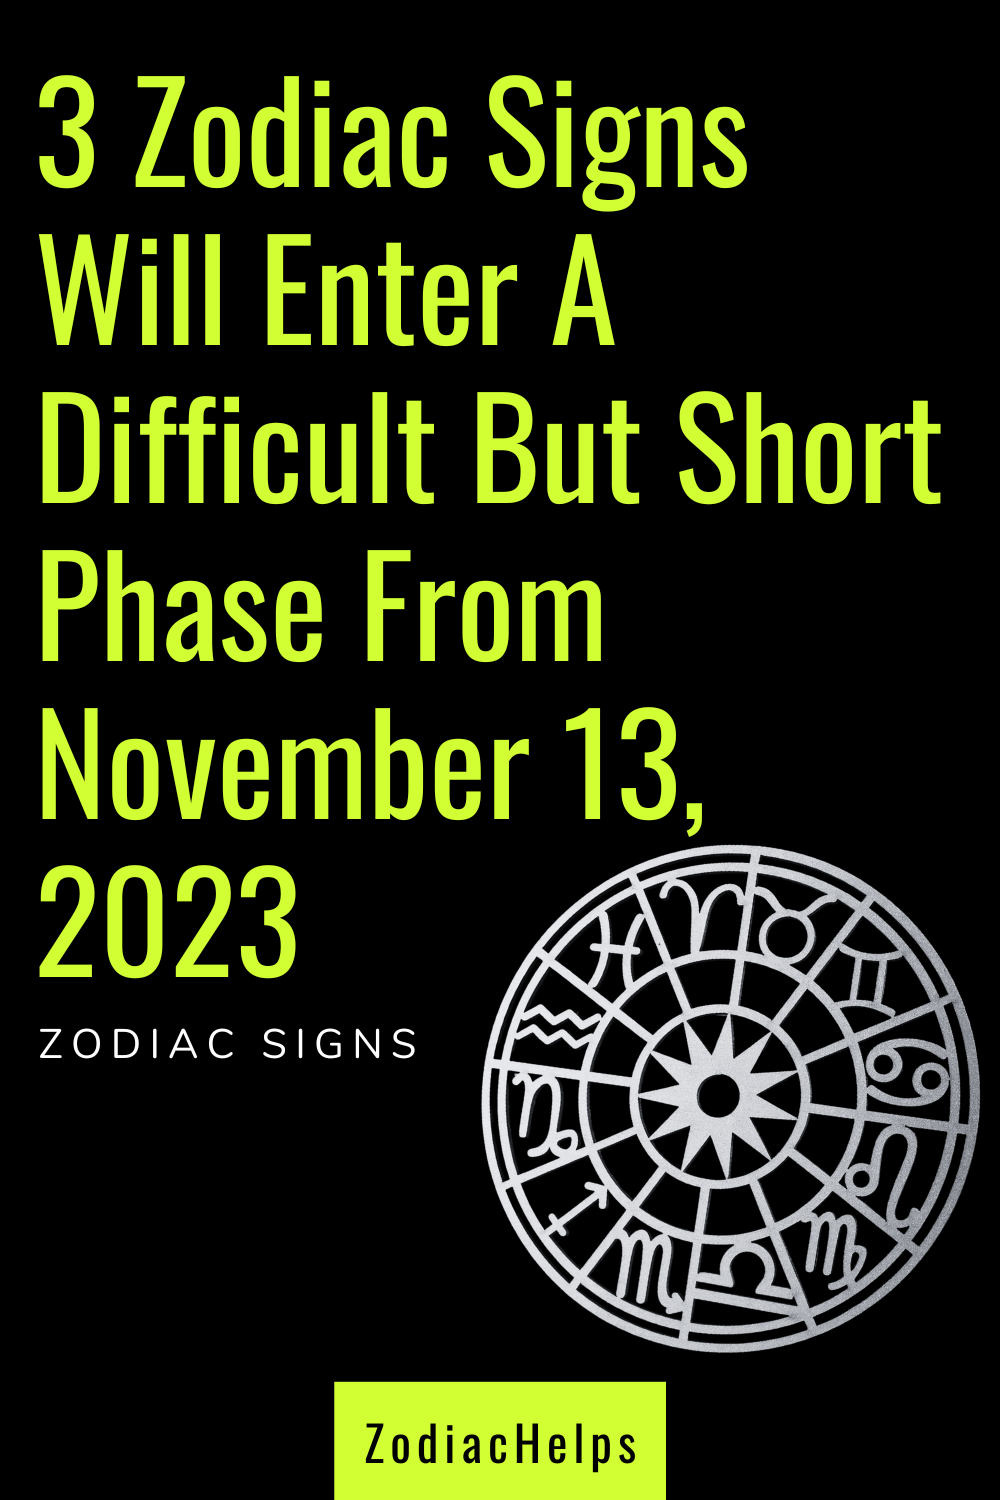 3 Zodiac Signs Will Enter A Difficult But Short Phase From November 13, 2023